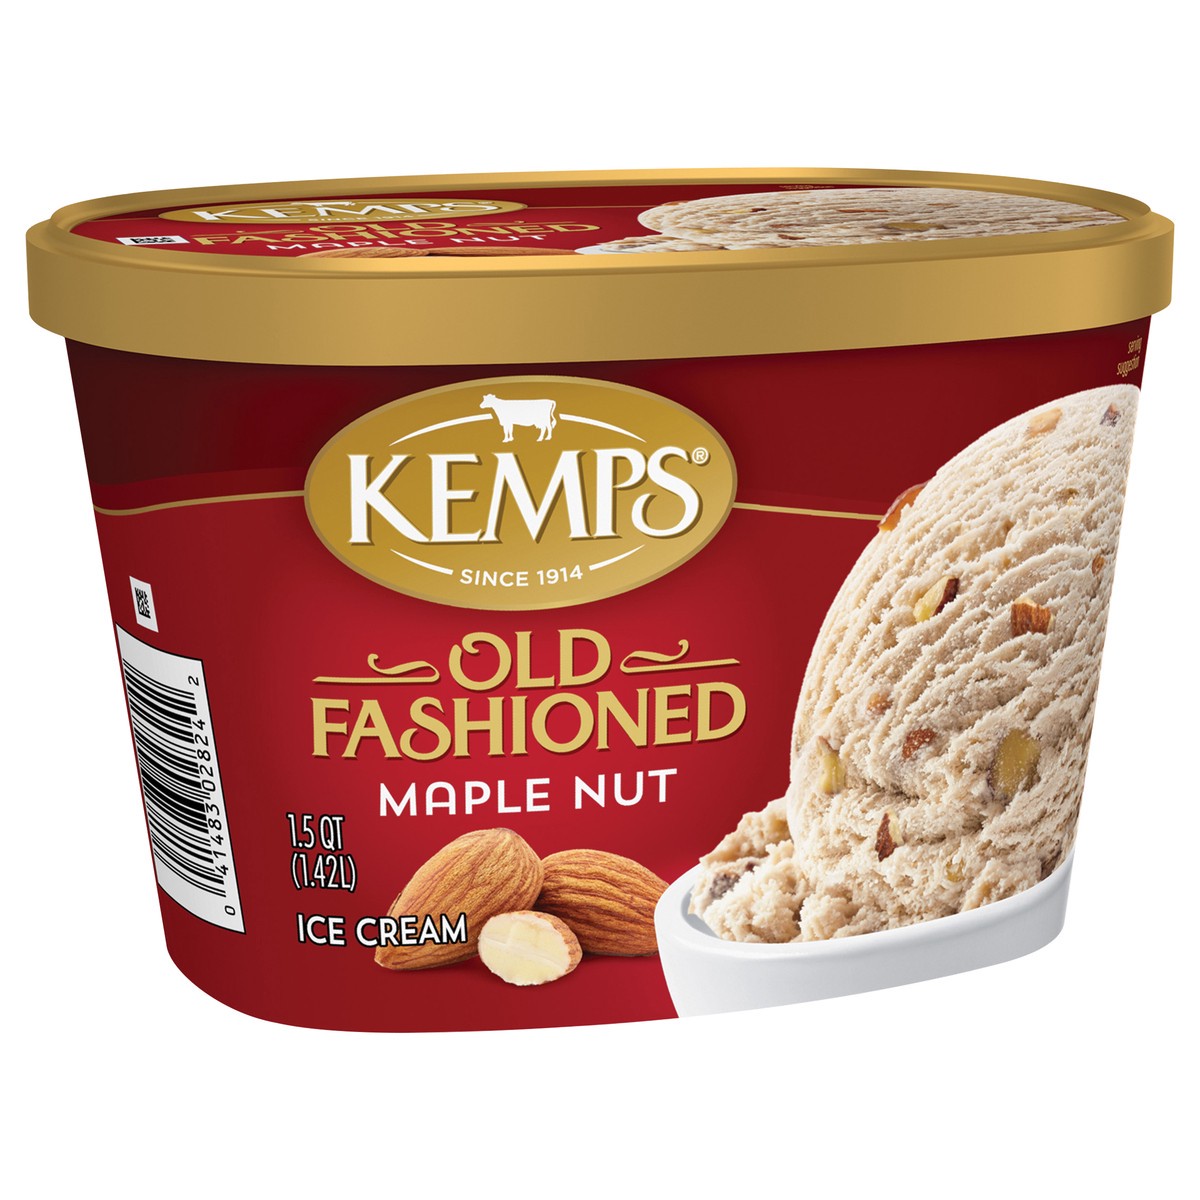 slide 10 of 13, Kemps Old Fashioned Maple Nut Ice Cream, 1.5 qt